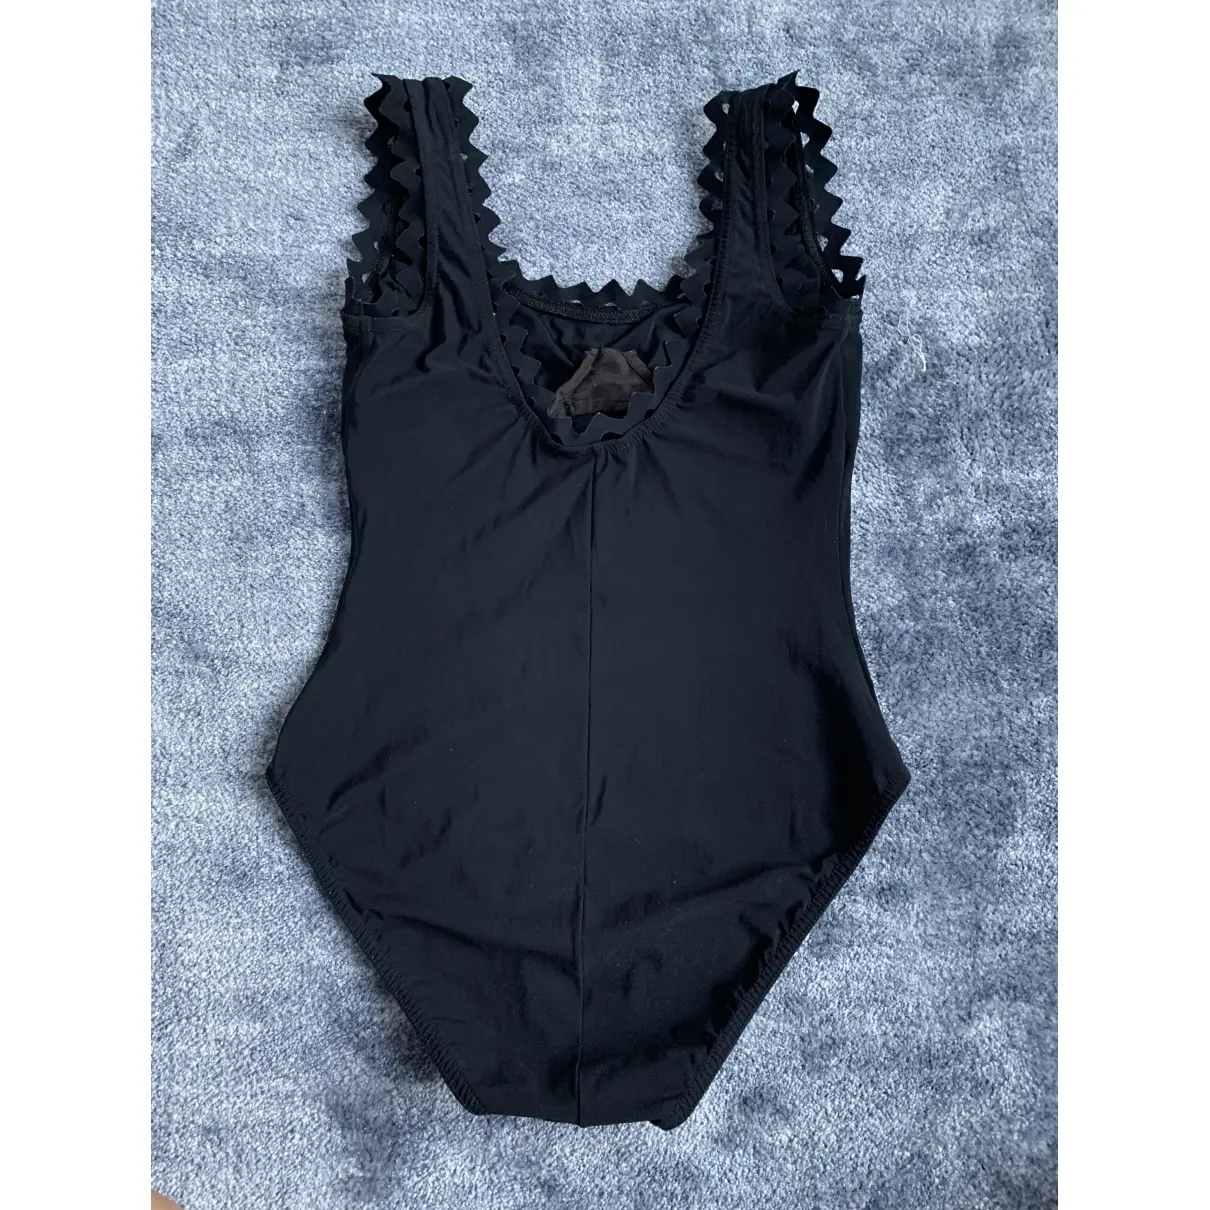 Buy Karla Colletto One-piece swimsuit online